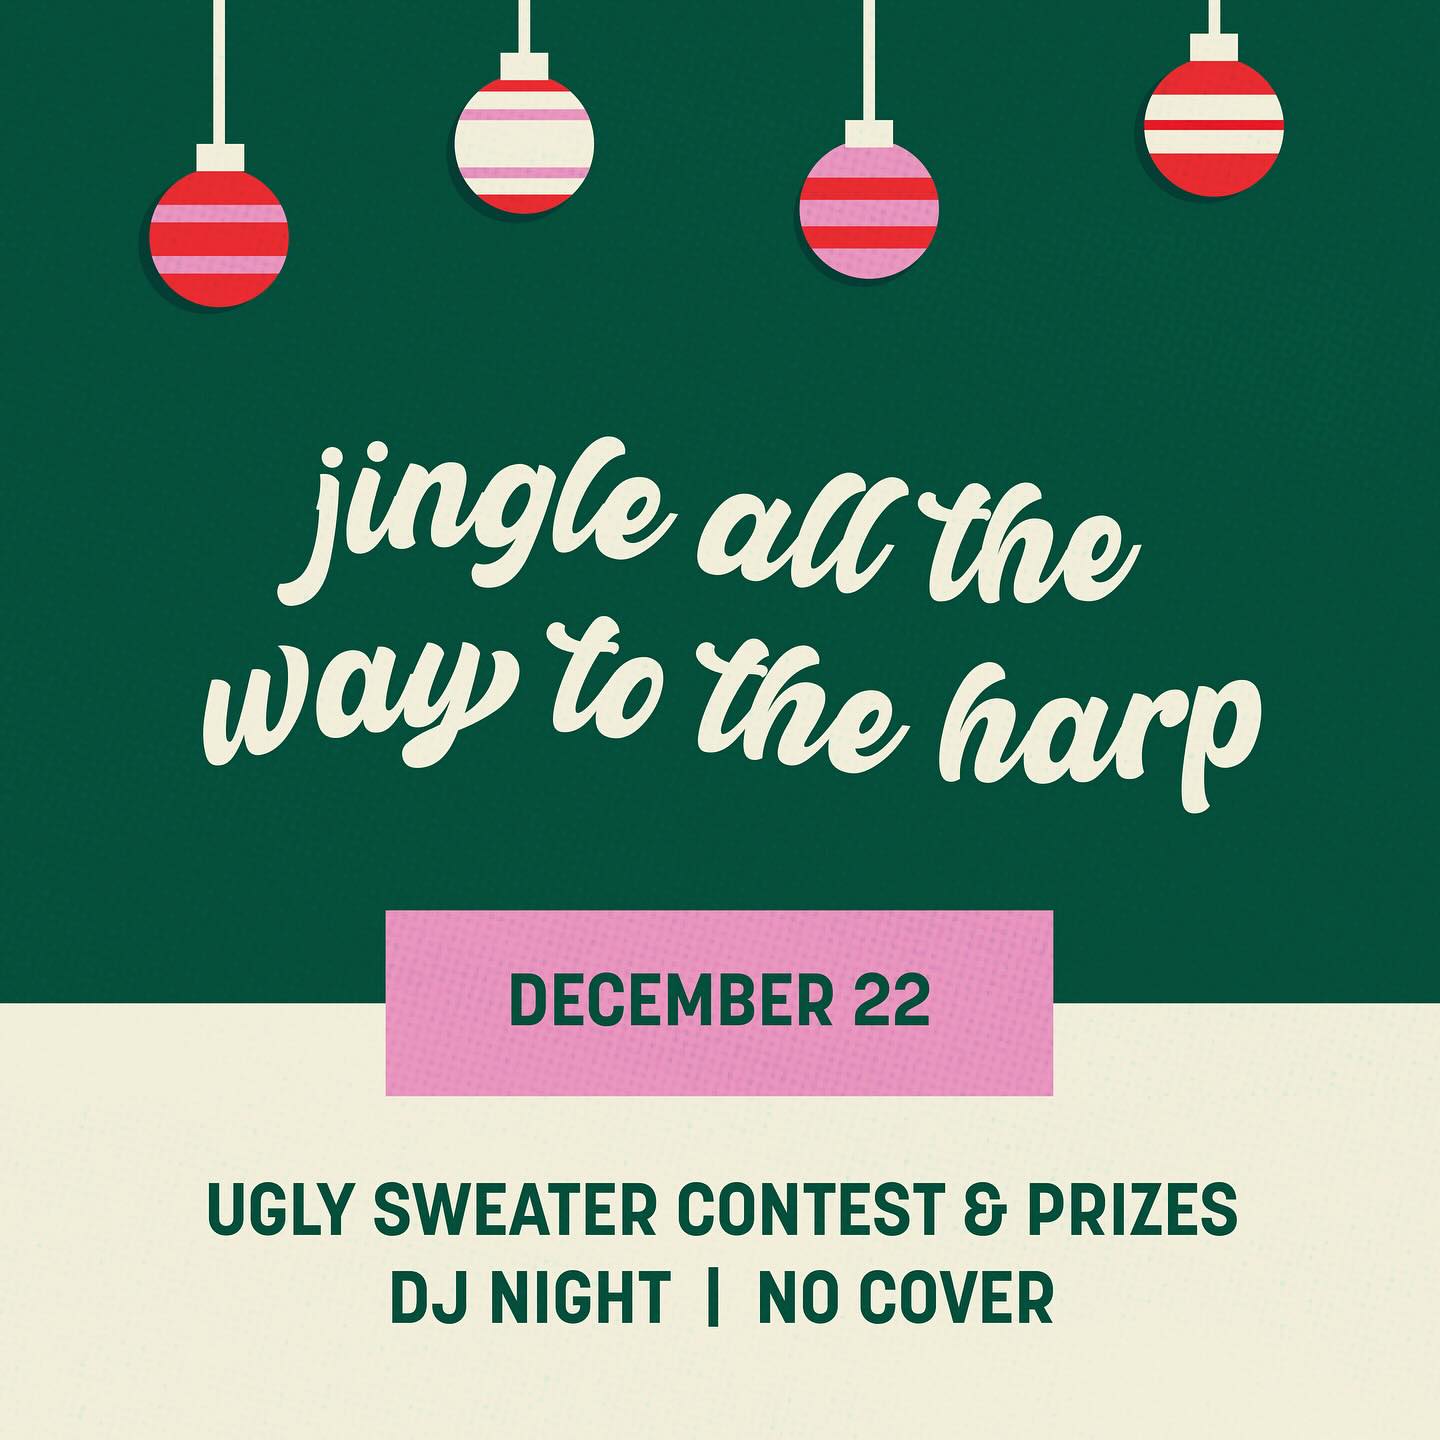 The Harp Ugly Sweater party